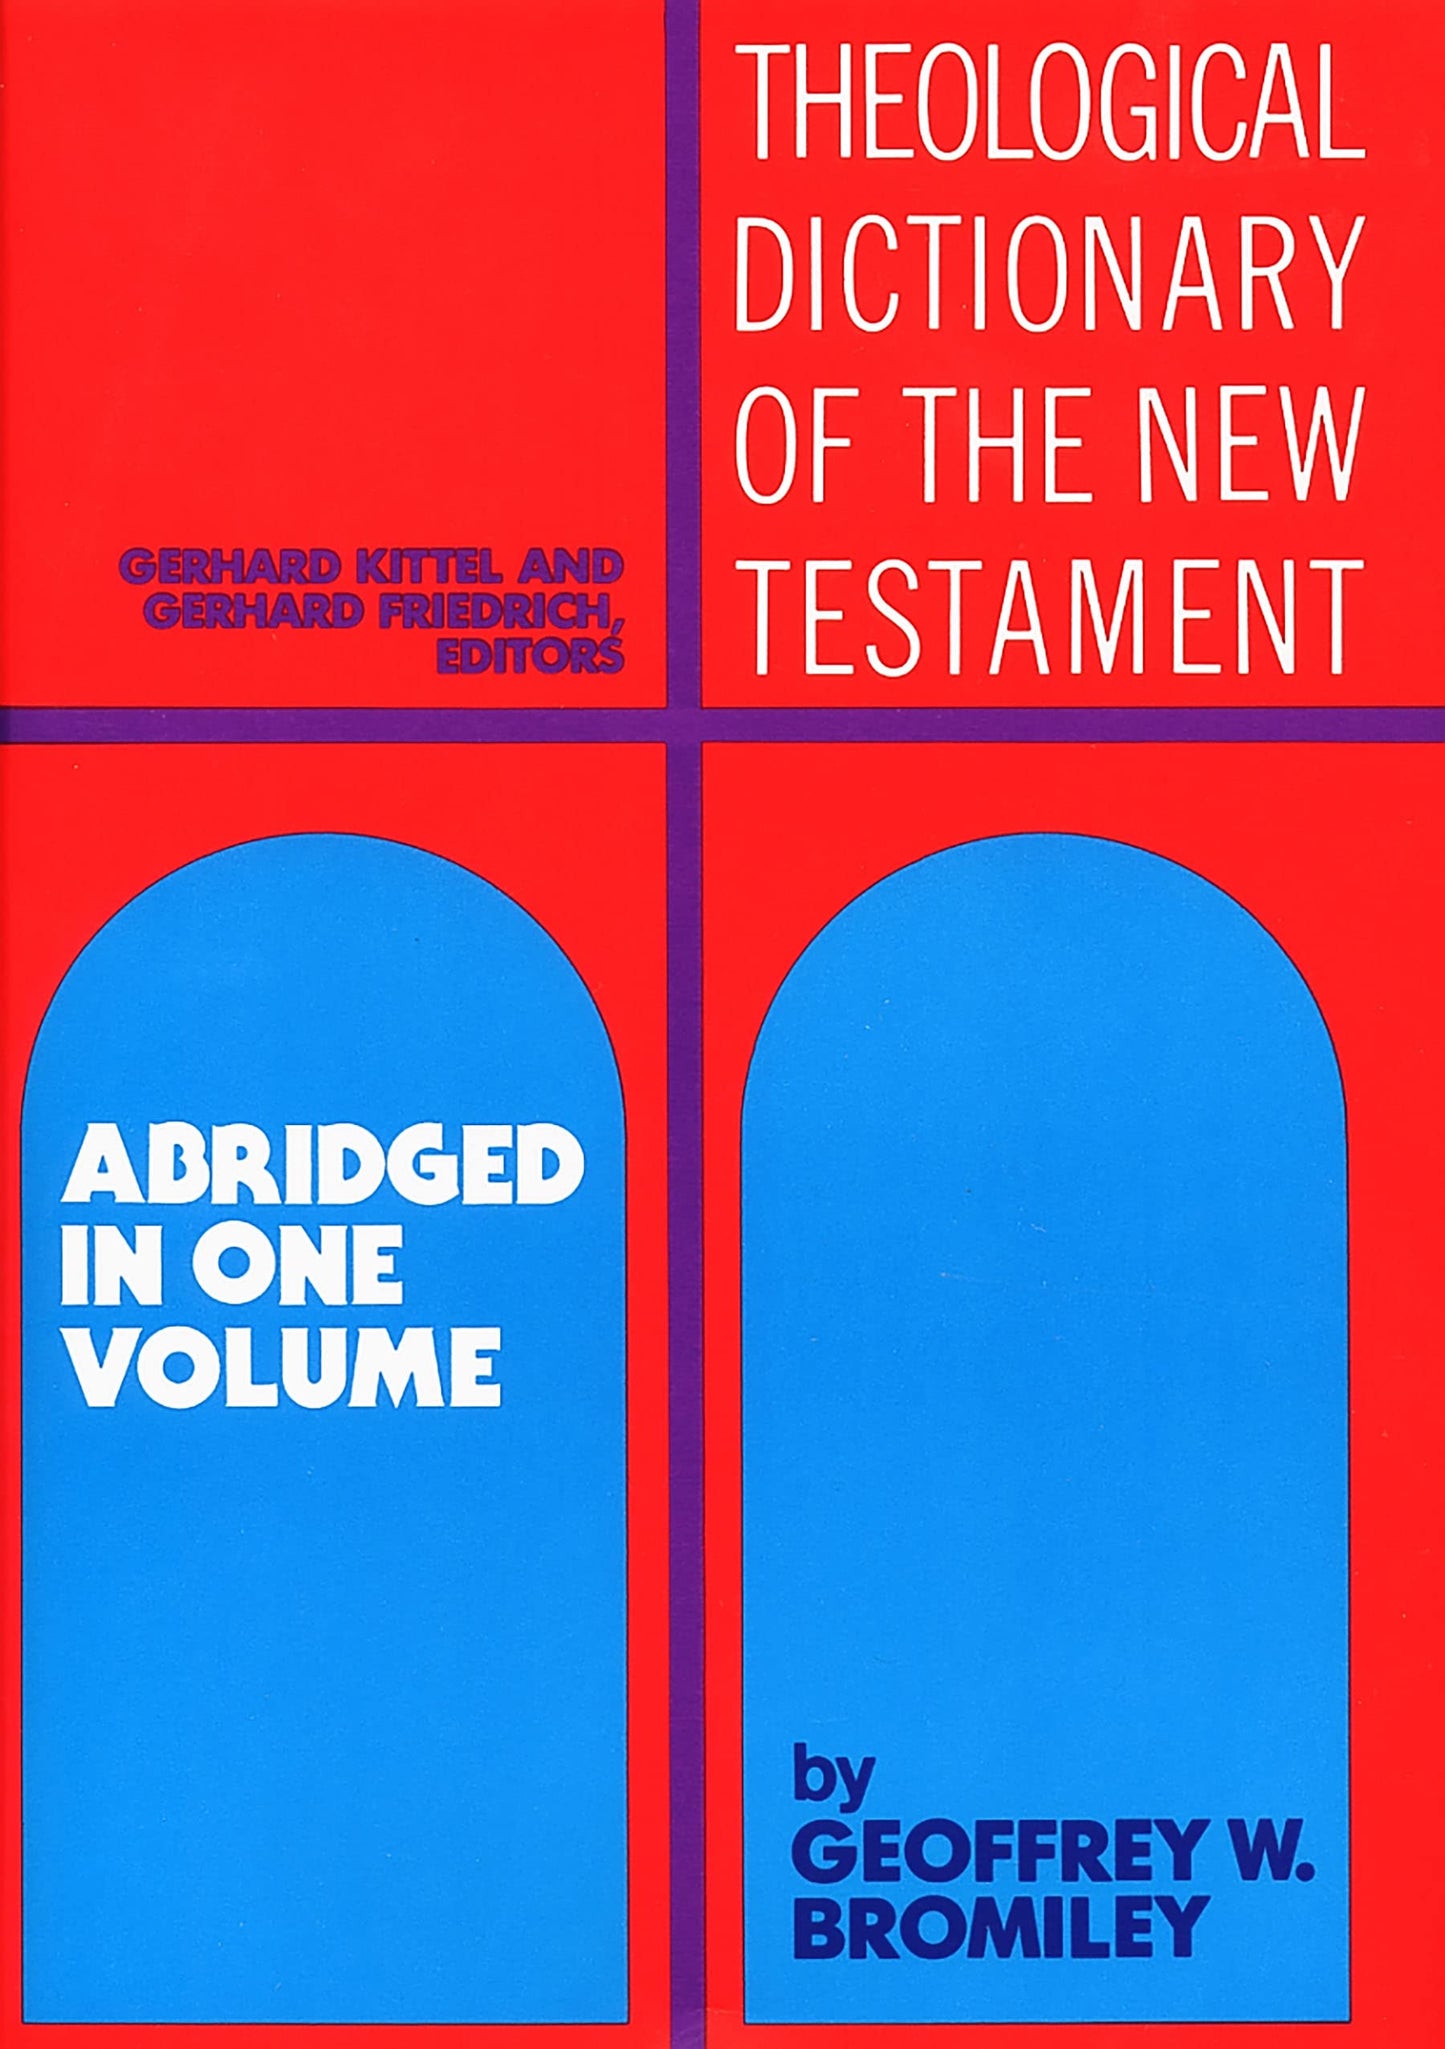 Theological Dictionary of the New Testament: Abridged in One Volume